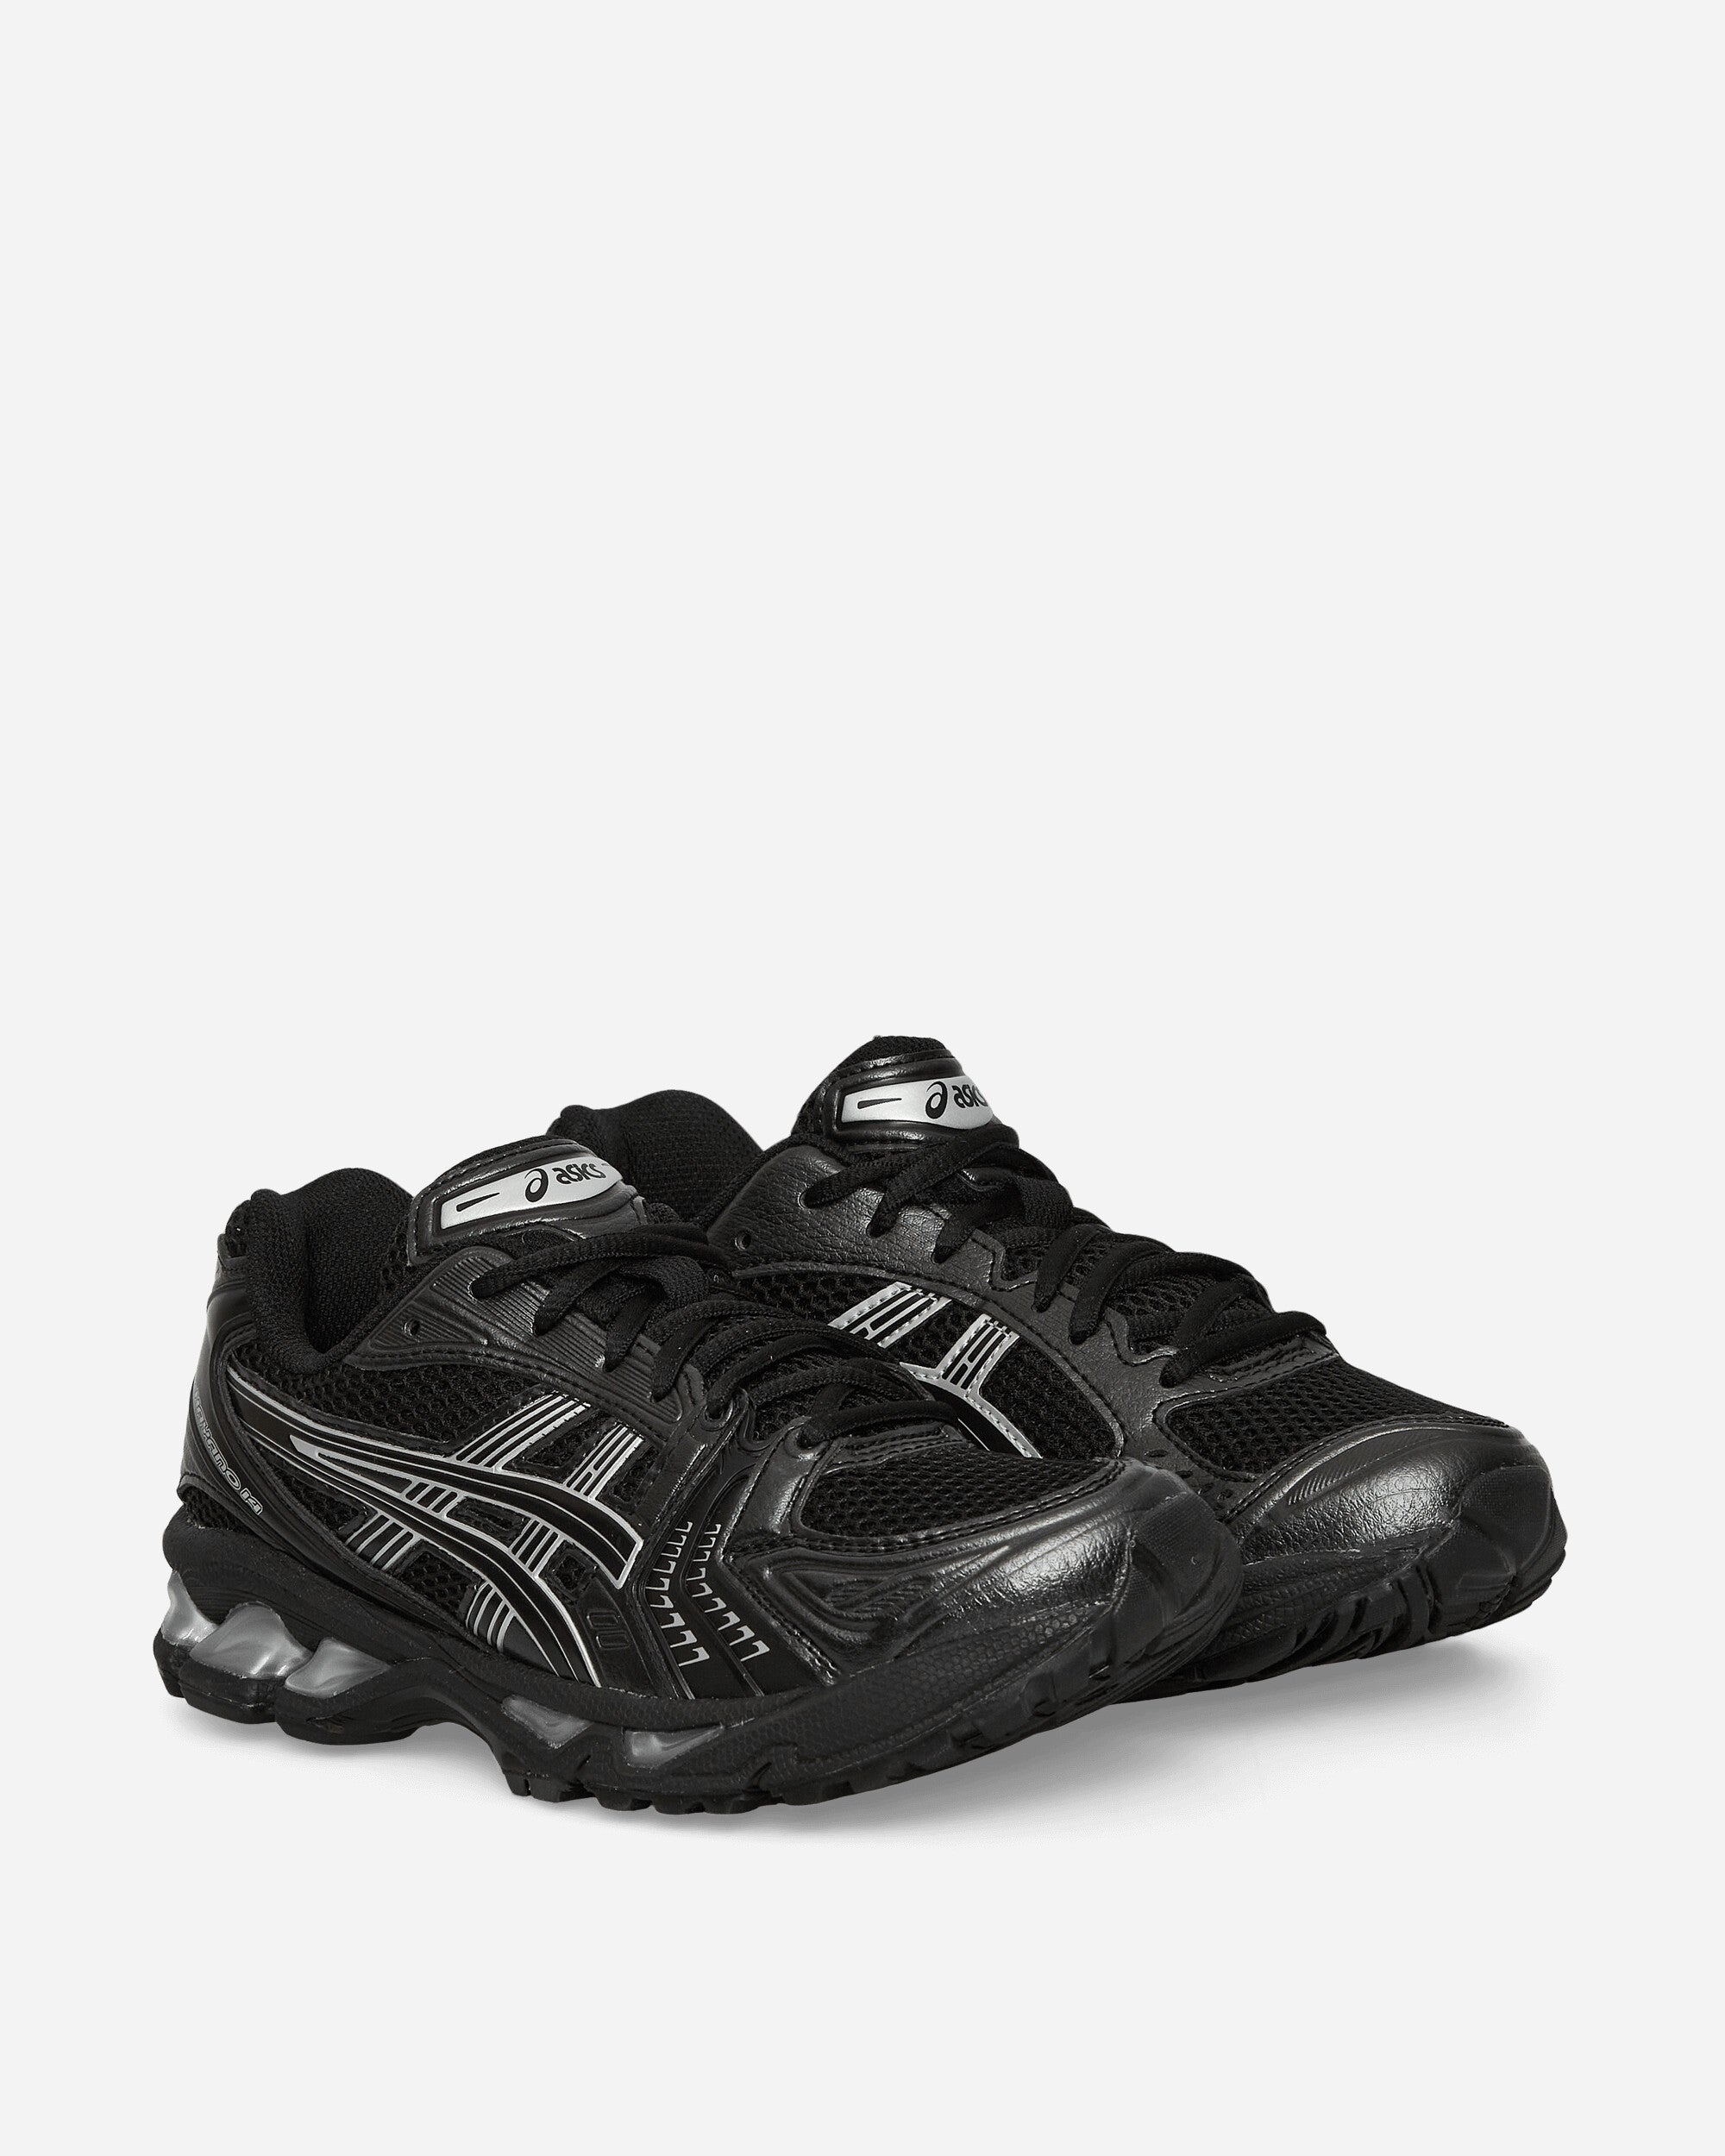 Asics Gel-Kayano 14 Black/Pure Silver Sneakers Low 1201A019-006